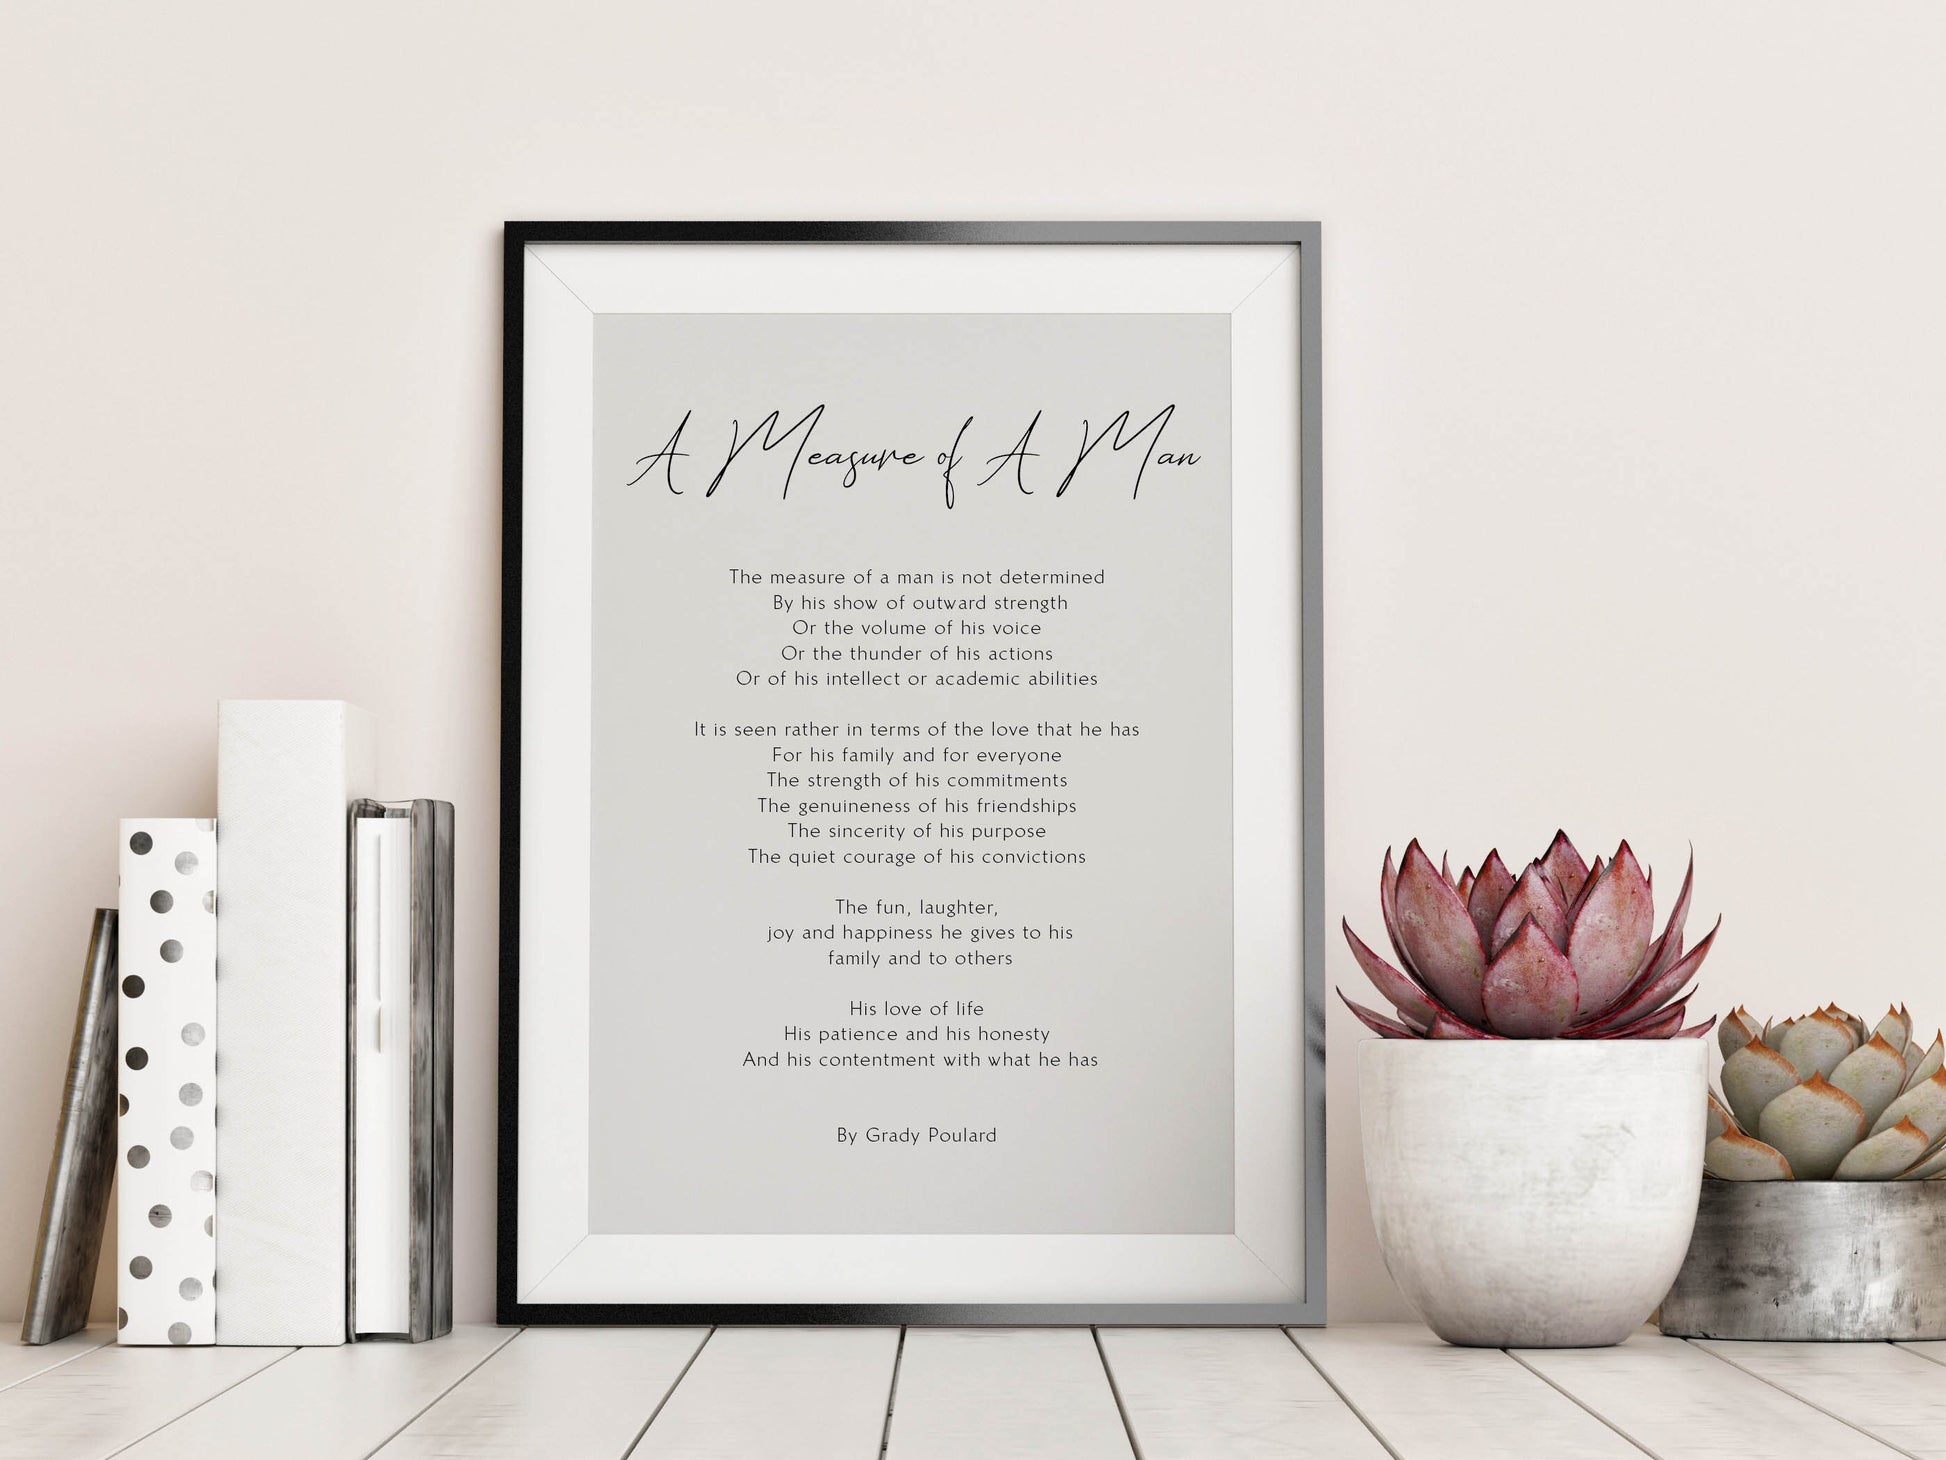 A measure of a man - Gift for Him - Poetry Gift for Dad - Anniversary Gift - Gift for husband - Poem by Grady Poulard